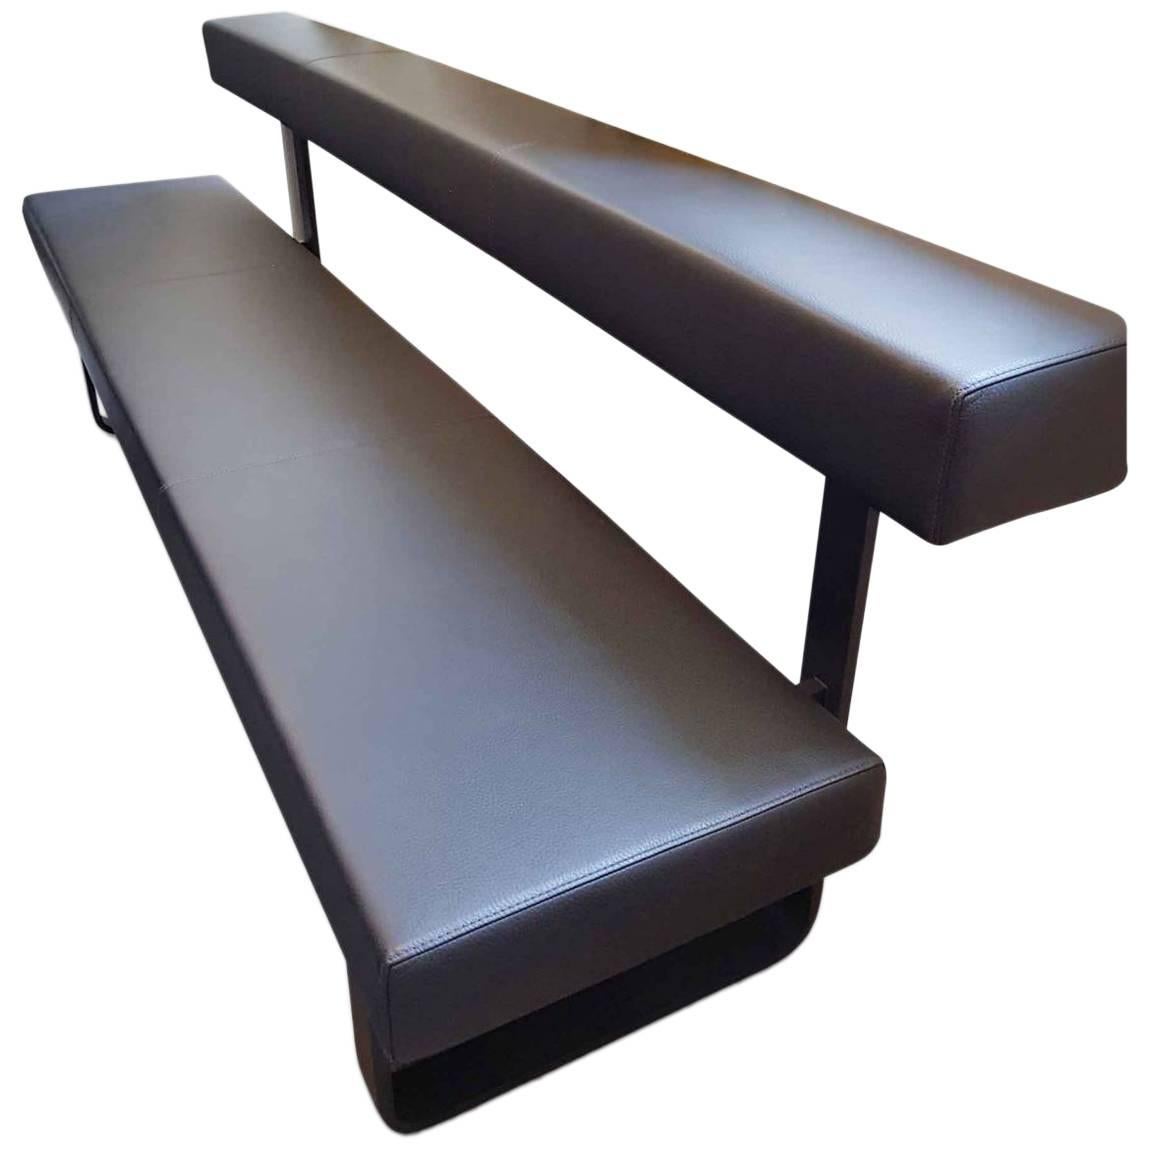 Bench "Permesso" by Manufacturer Girsberger with 100% Genuine Leather and Steel For Sale